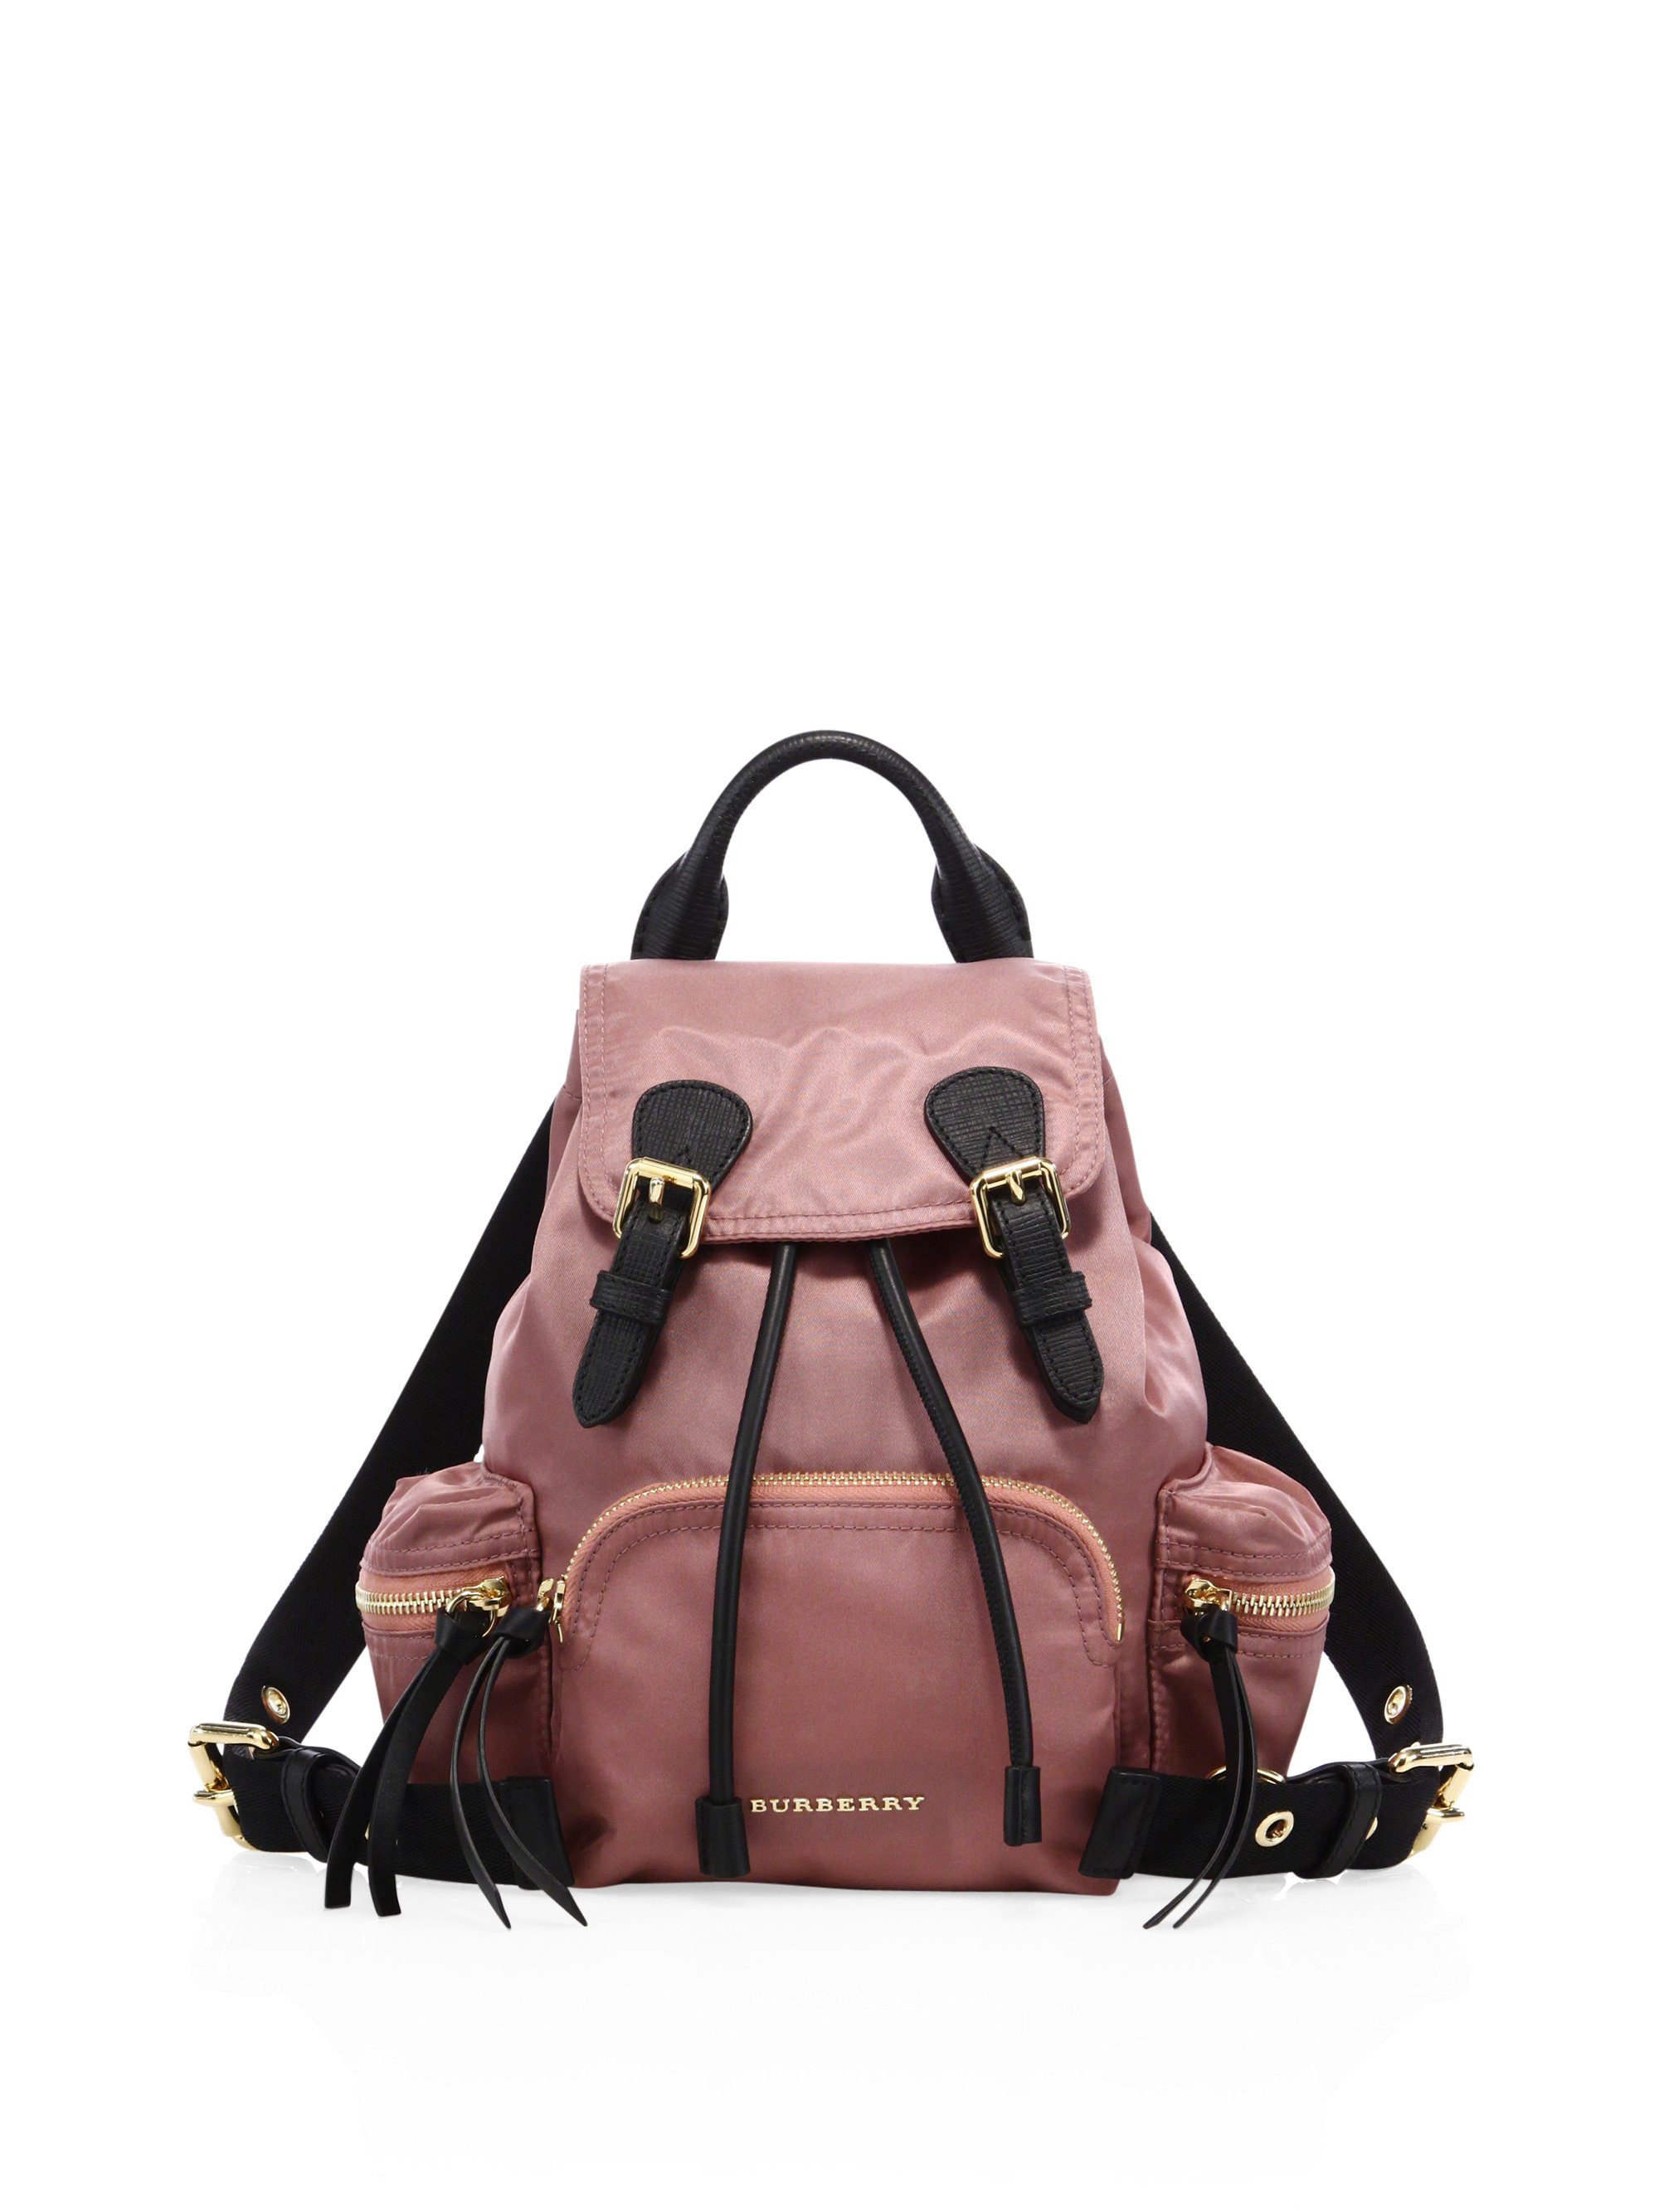 Burberry Synthetic Small Nylon Rucksack in Mauve Pink (Pink) | Lyst